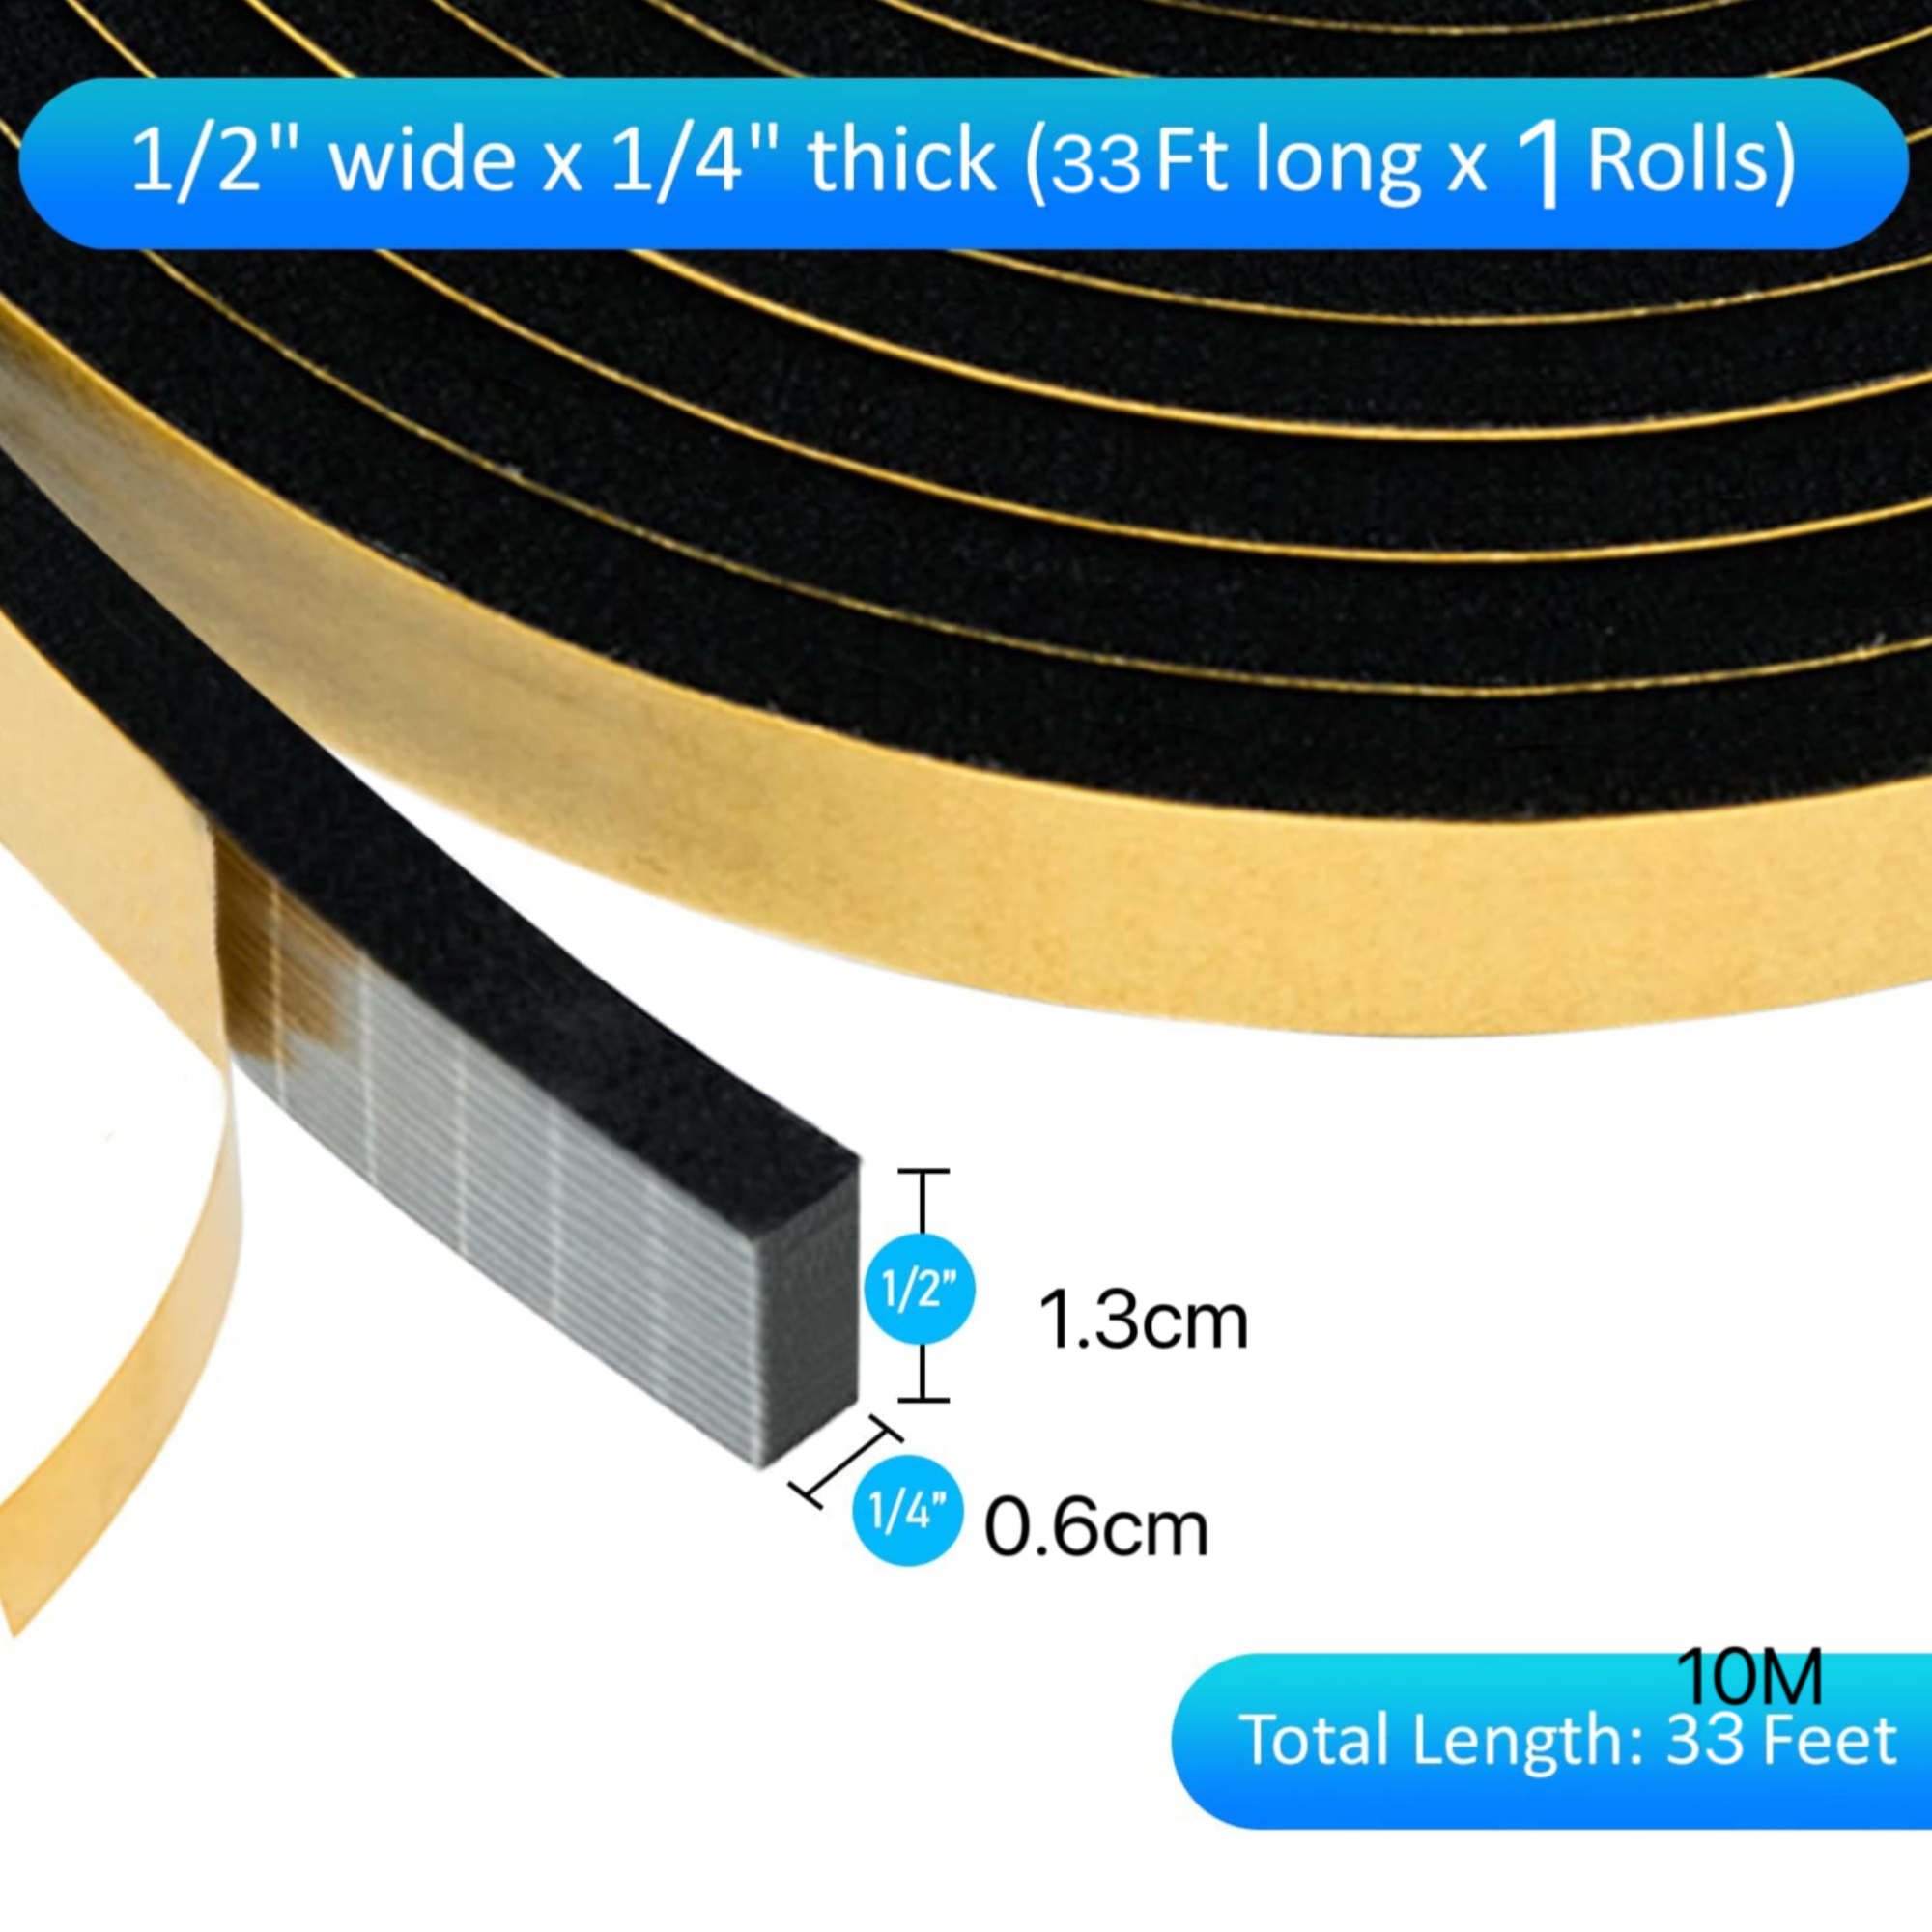 High Density Foam Weather Stripping Door Seal Strip Insulation Tape Roll for Insulating Door Frame, Window, Air Conditioner | Self Adhesive Sealing